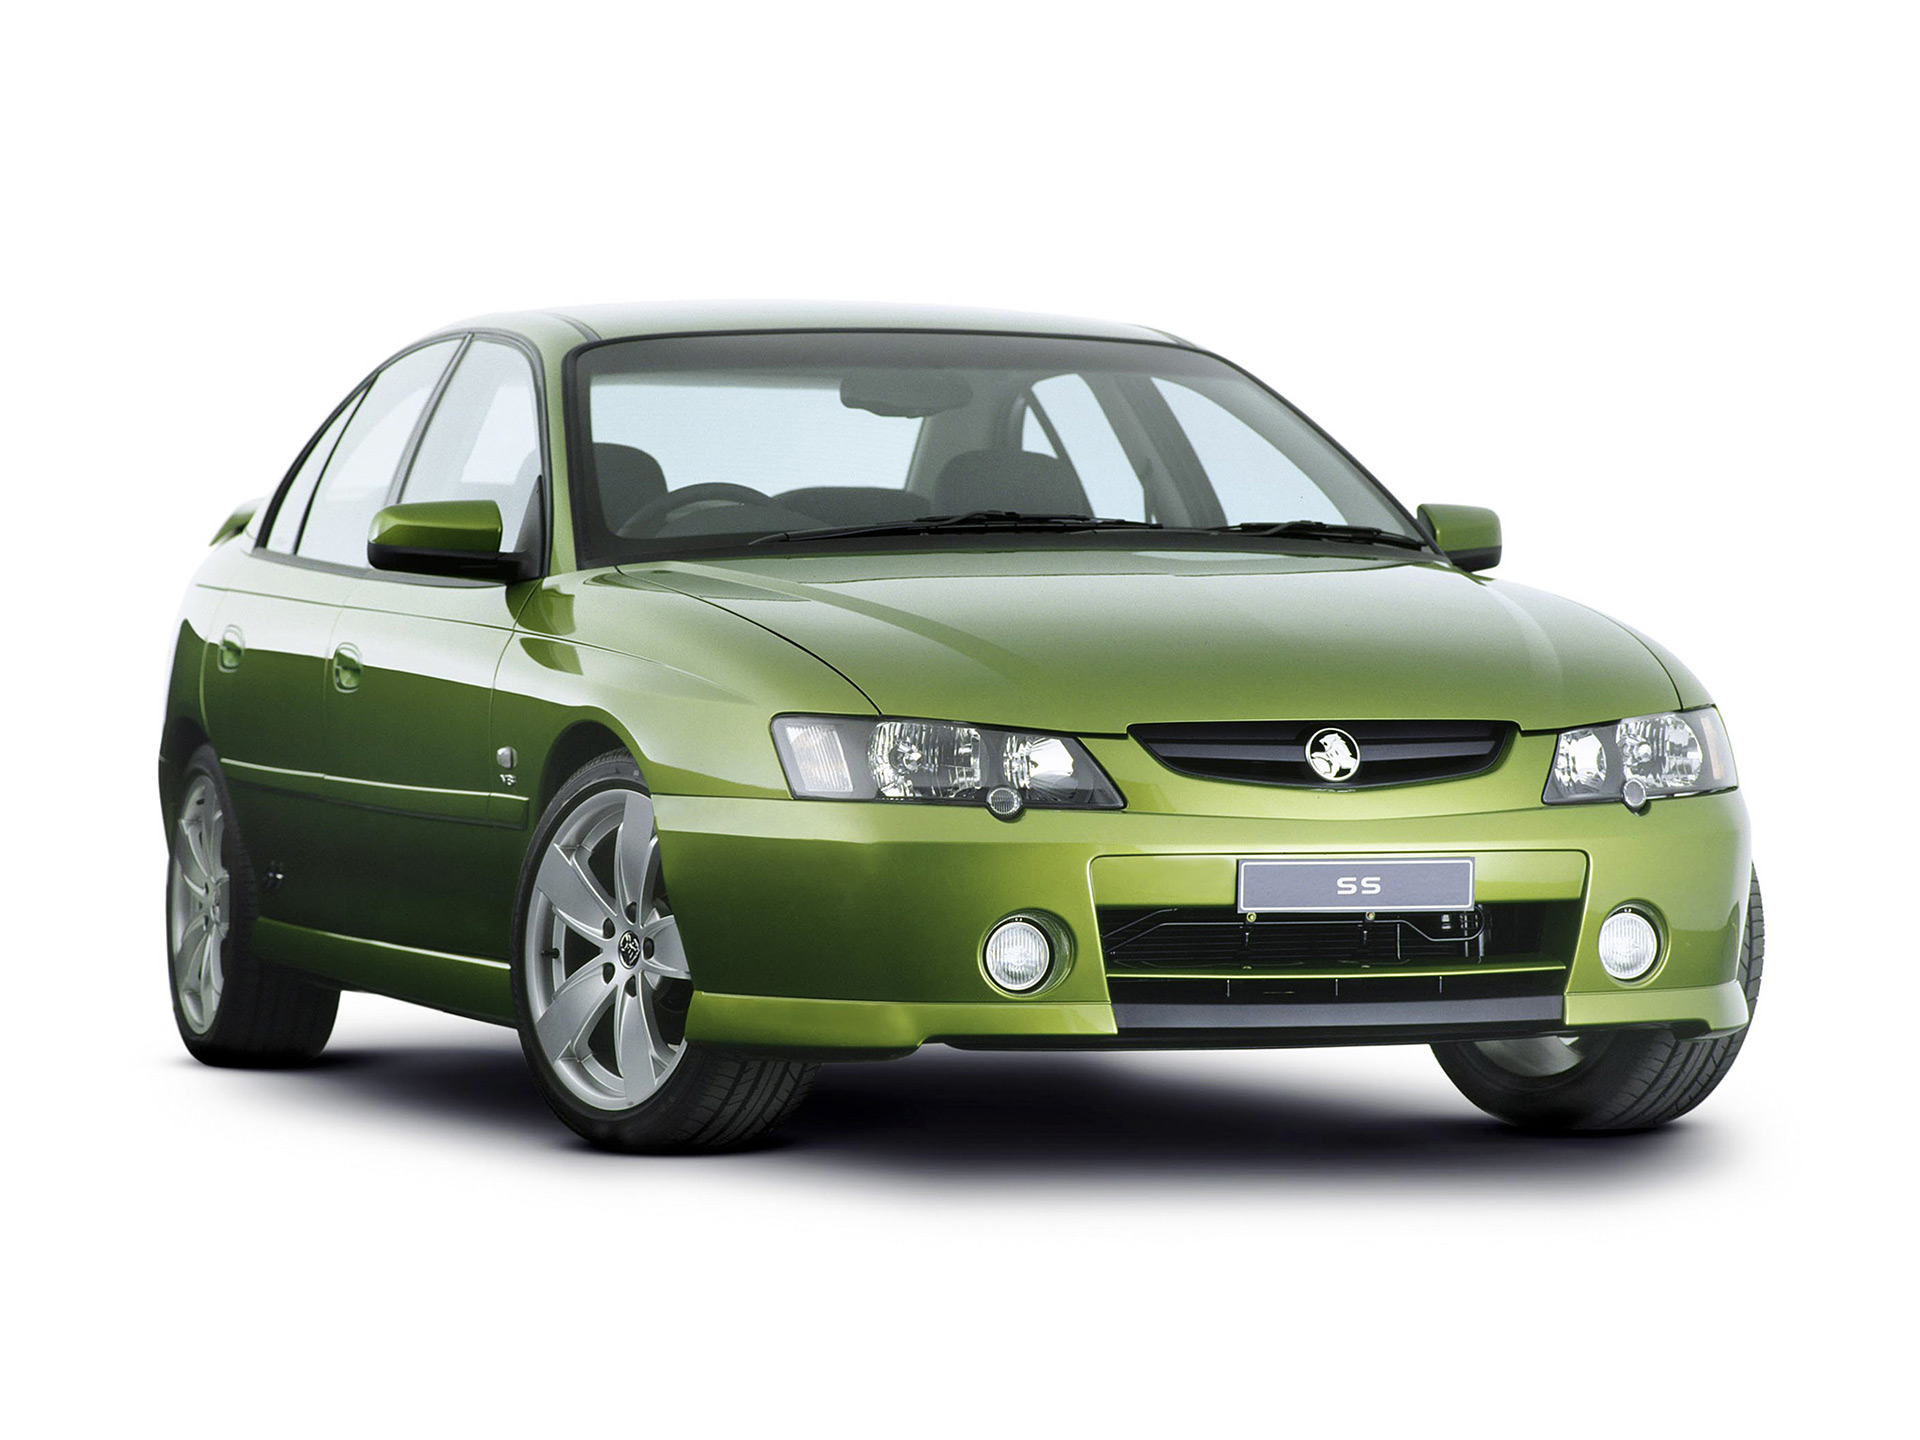  2002 Holden Commodore SS Wallpaper.